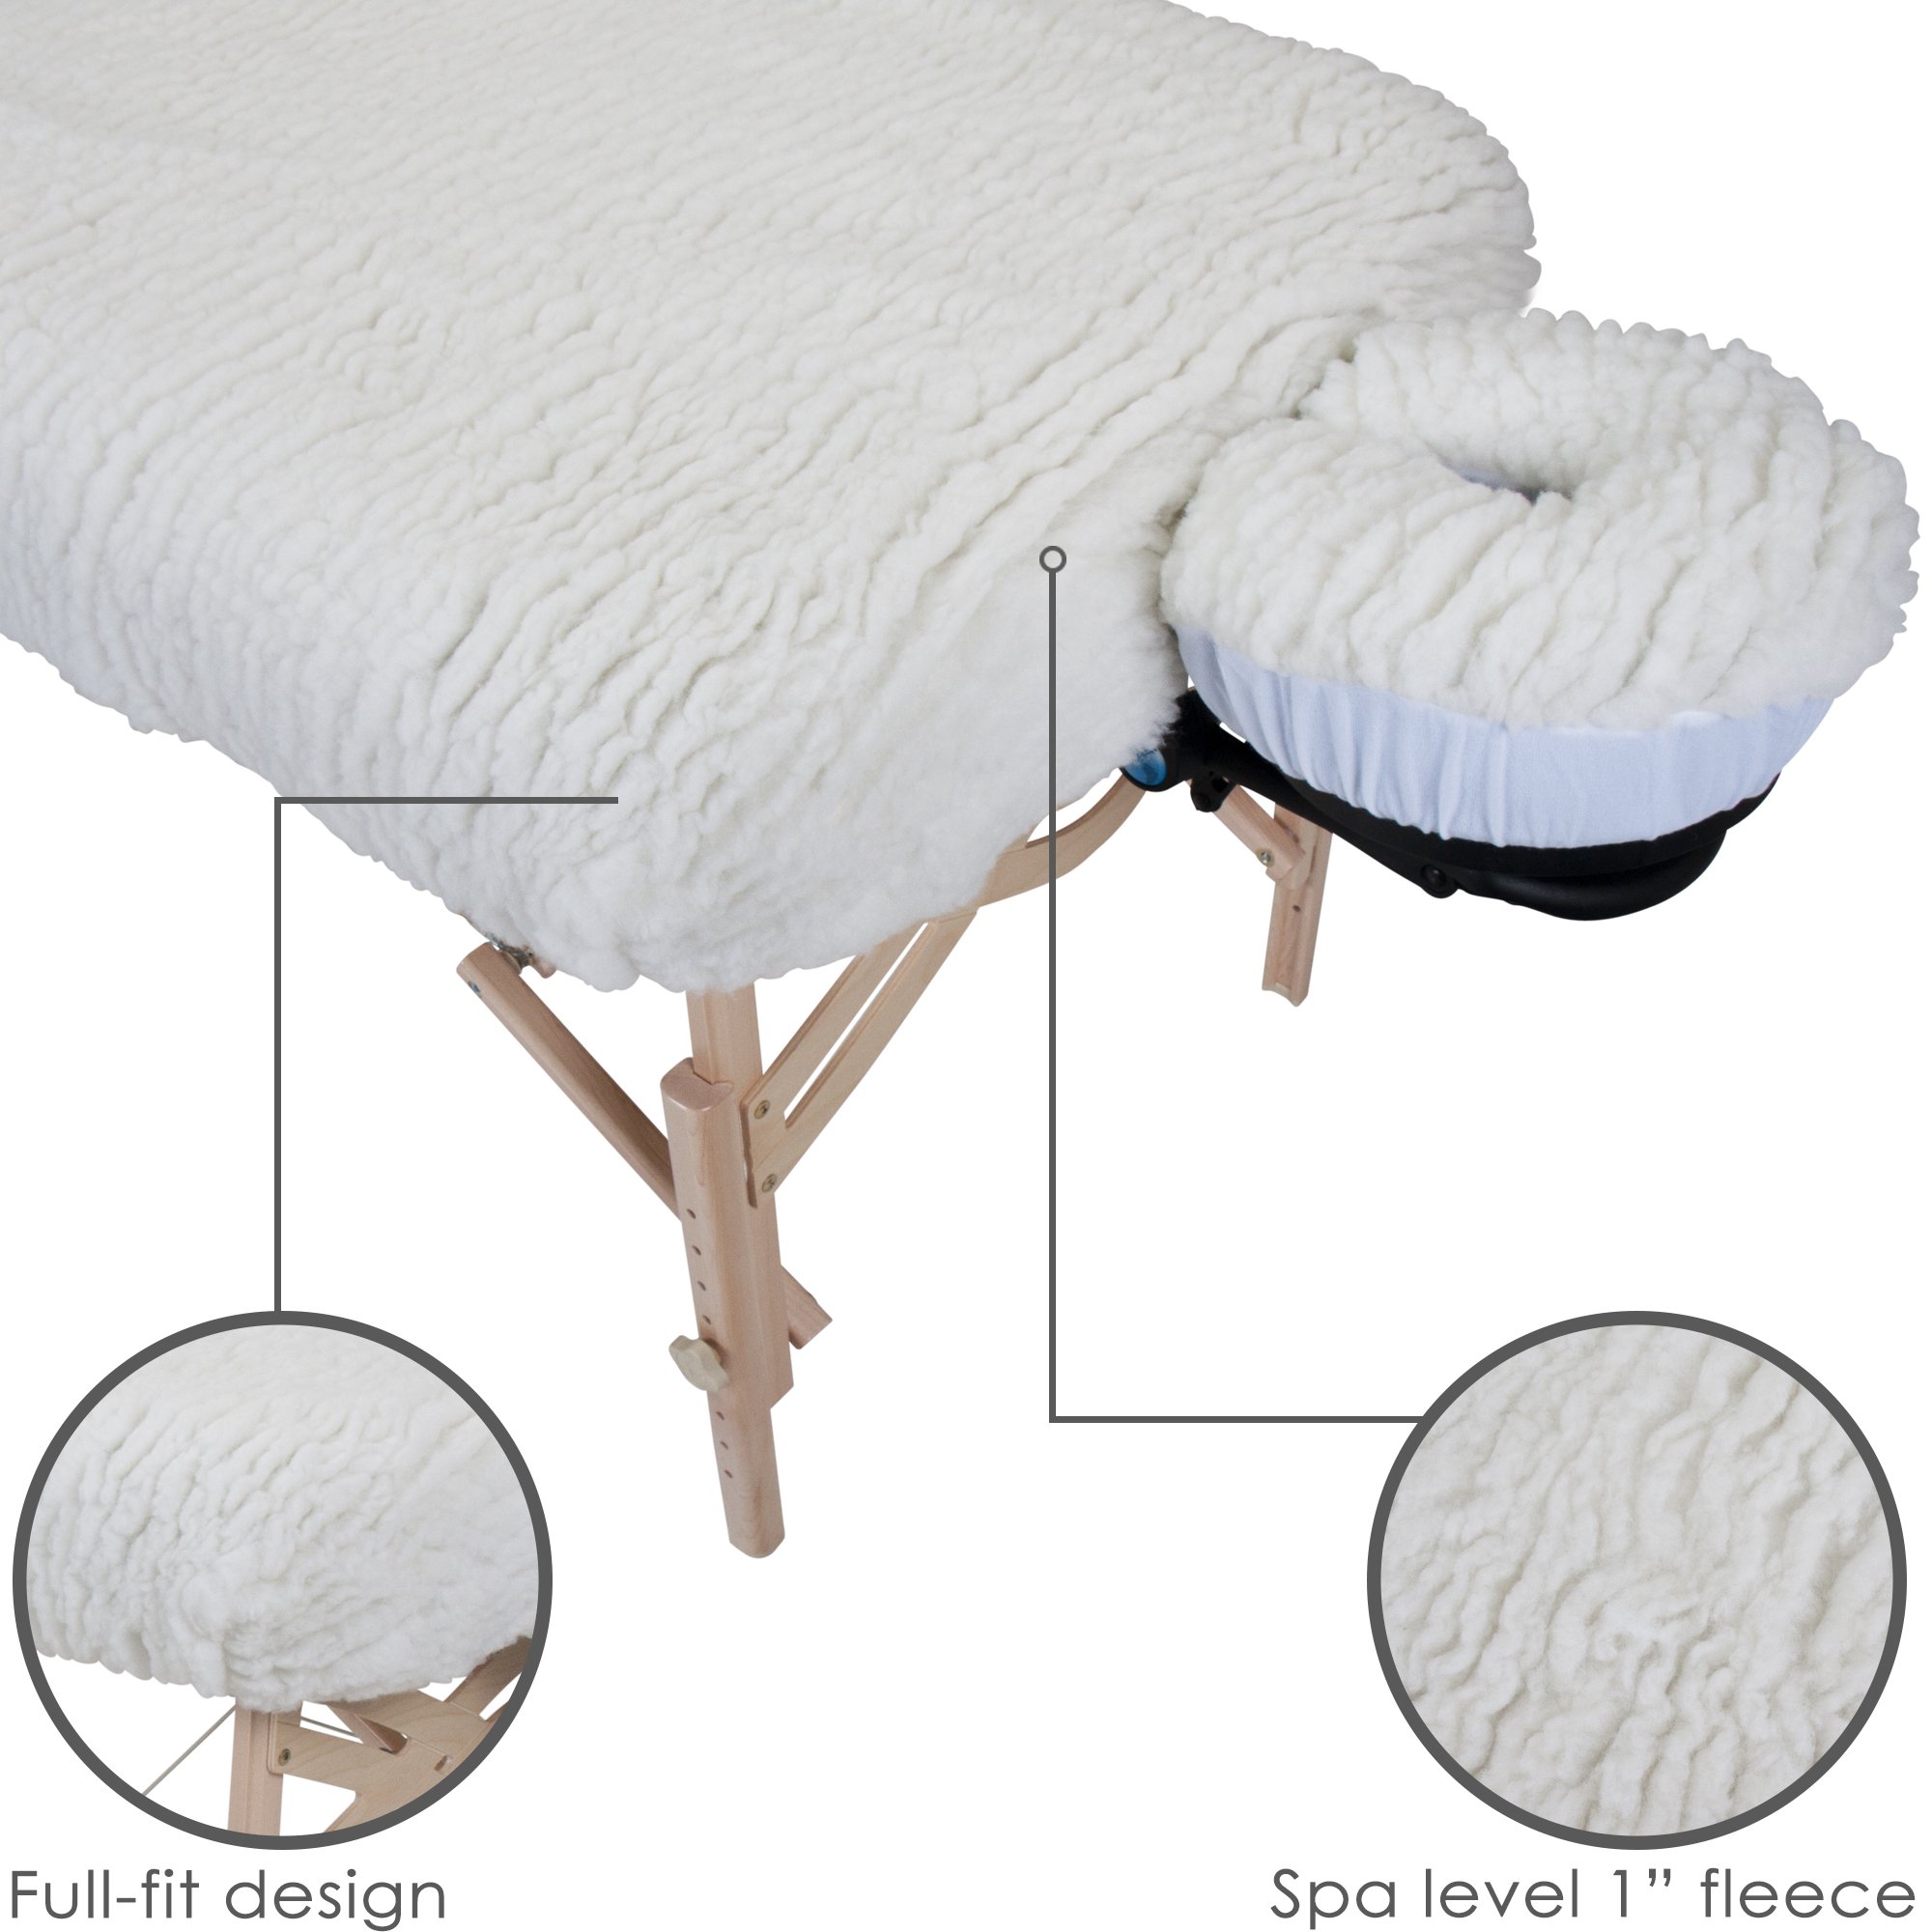 EARTHLITE Massage Table Fleece Pads – Different Styles & Sets - Cover Your Massage Table & Face Cradles in Cozy, Warm Fleece